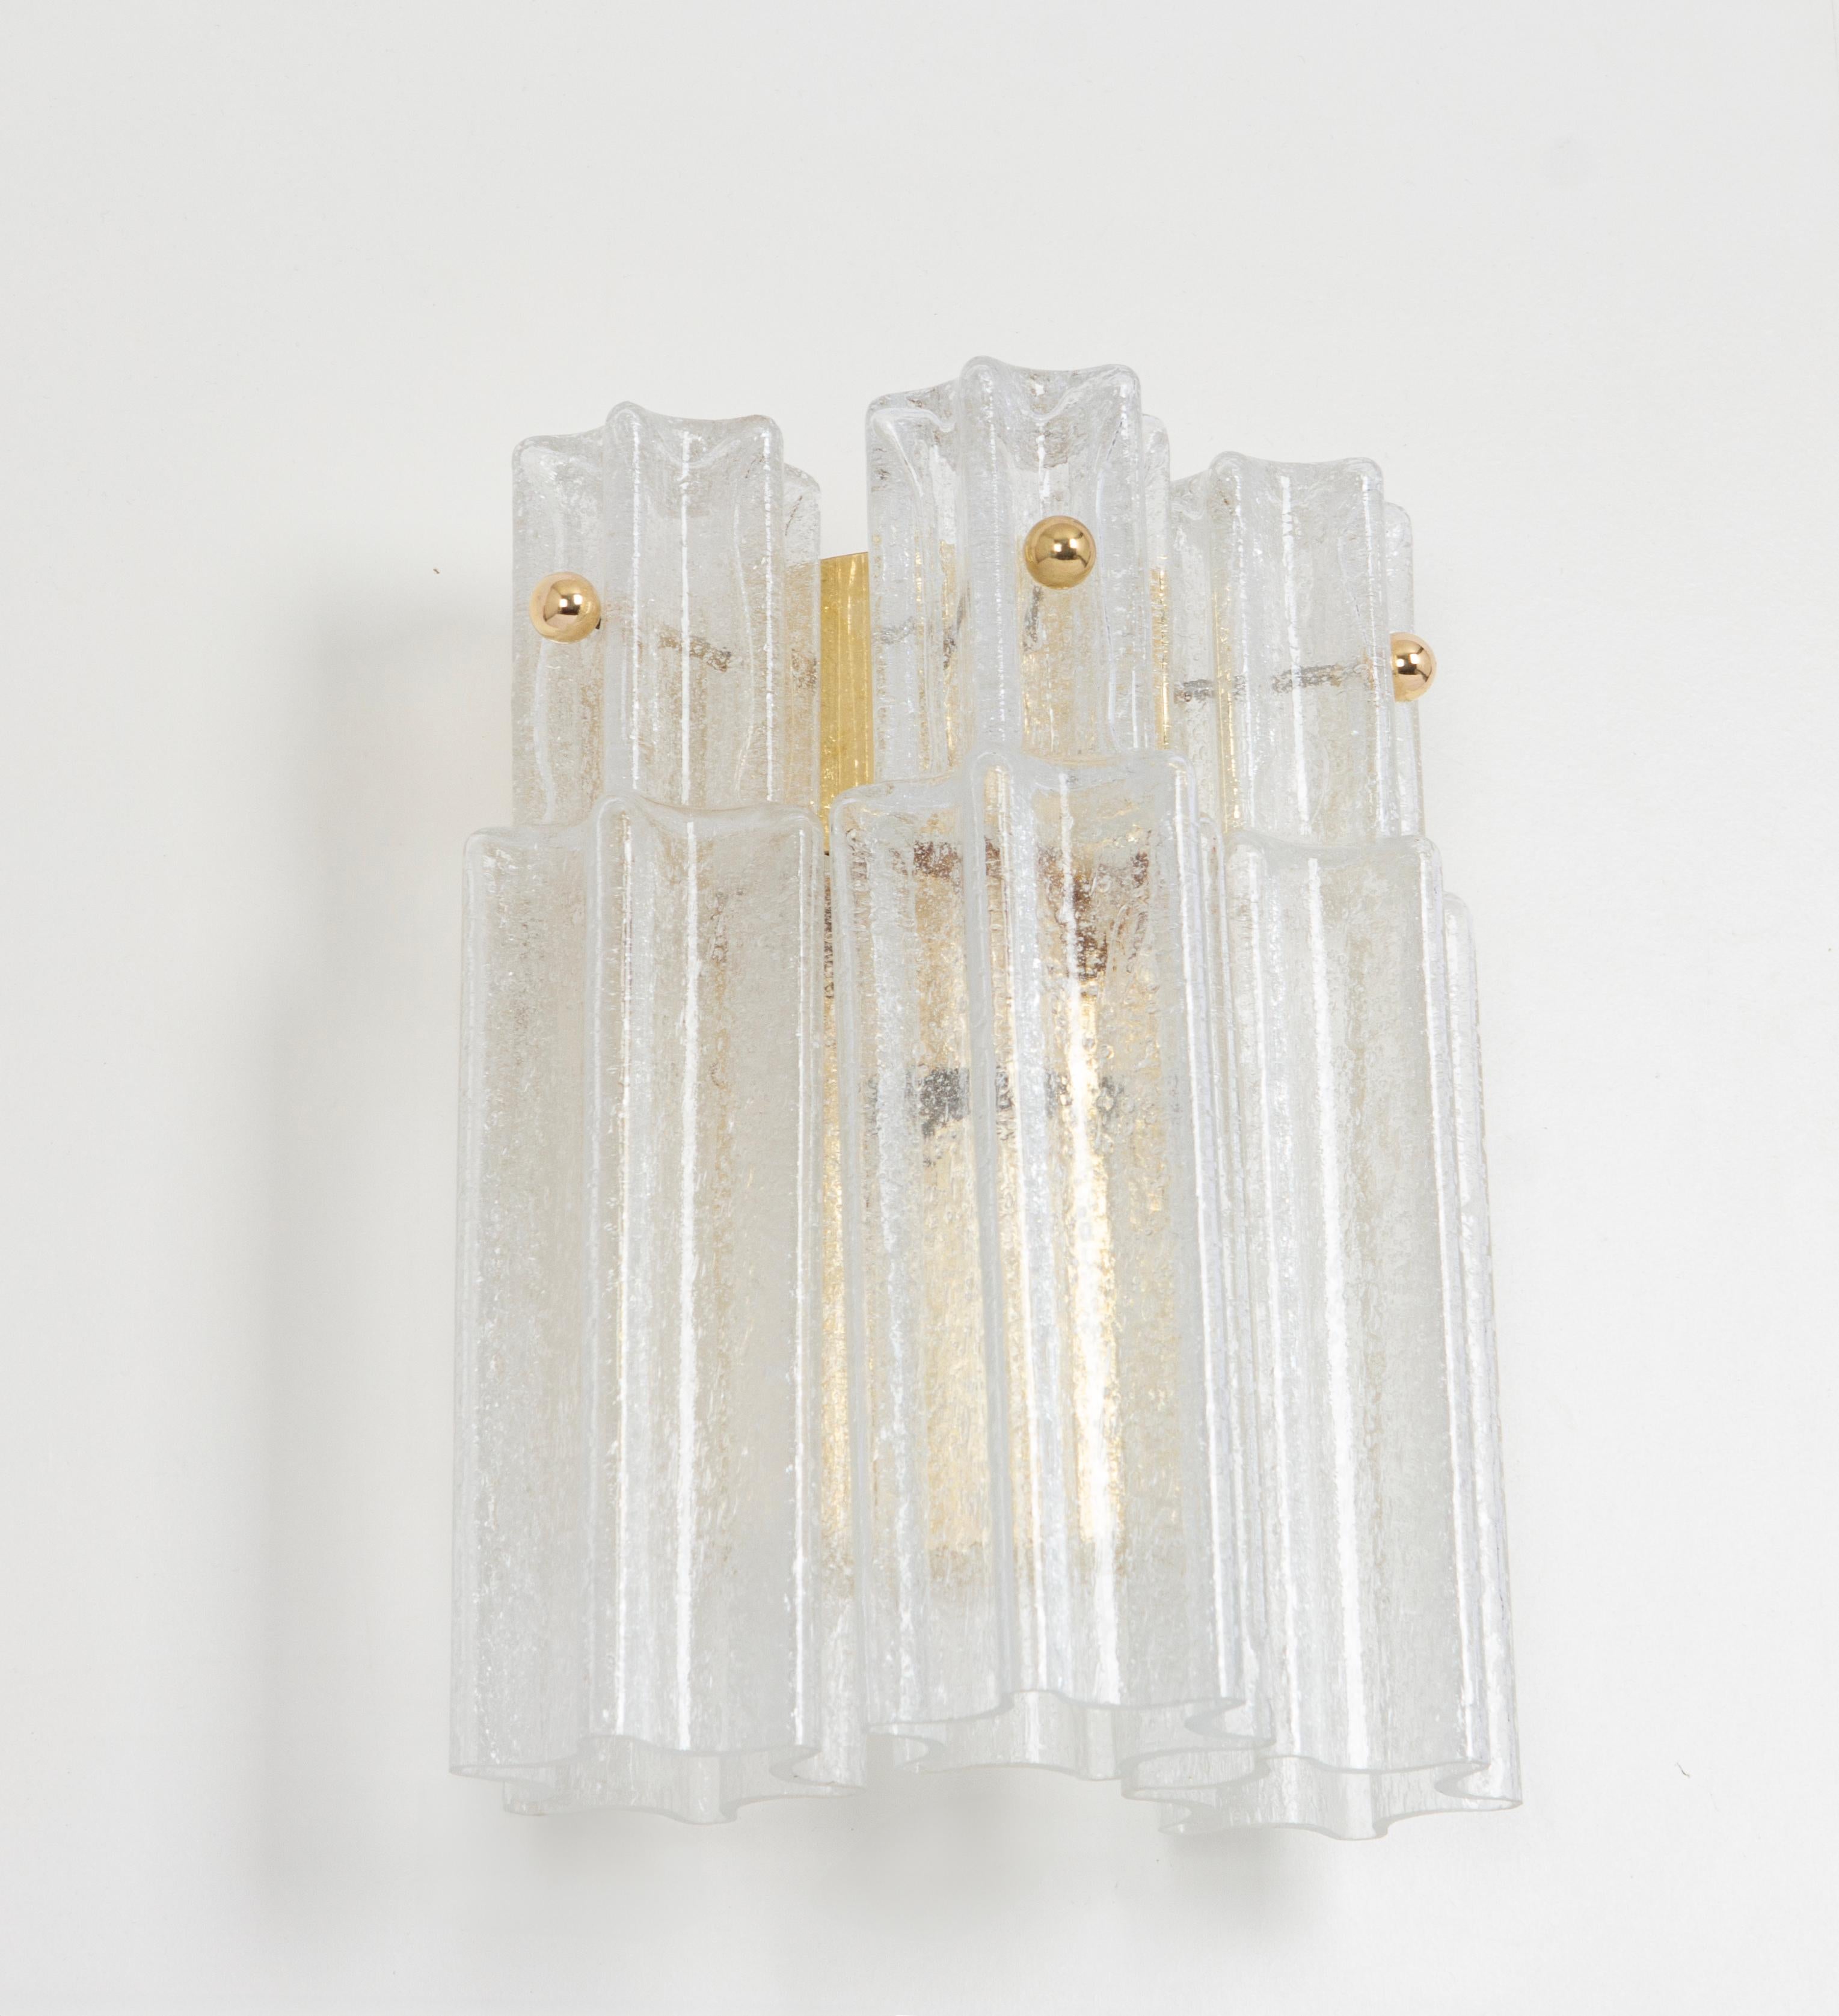 Mid-Century Modern 1 of 2 Sets of Frosted Glass Wall Lights by Limburg, Germany, 1960s For Sale